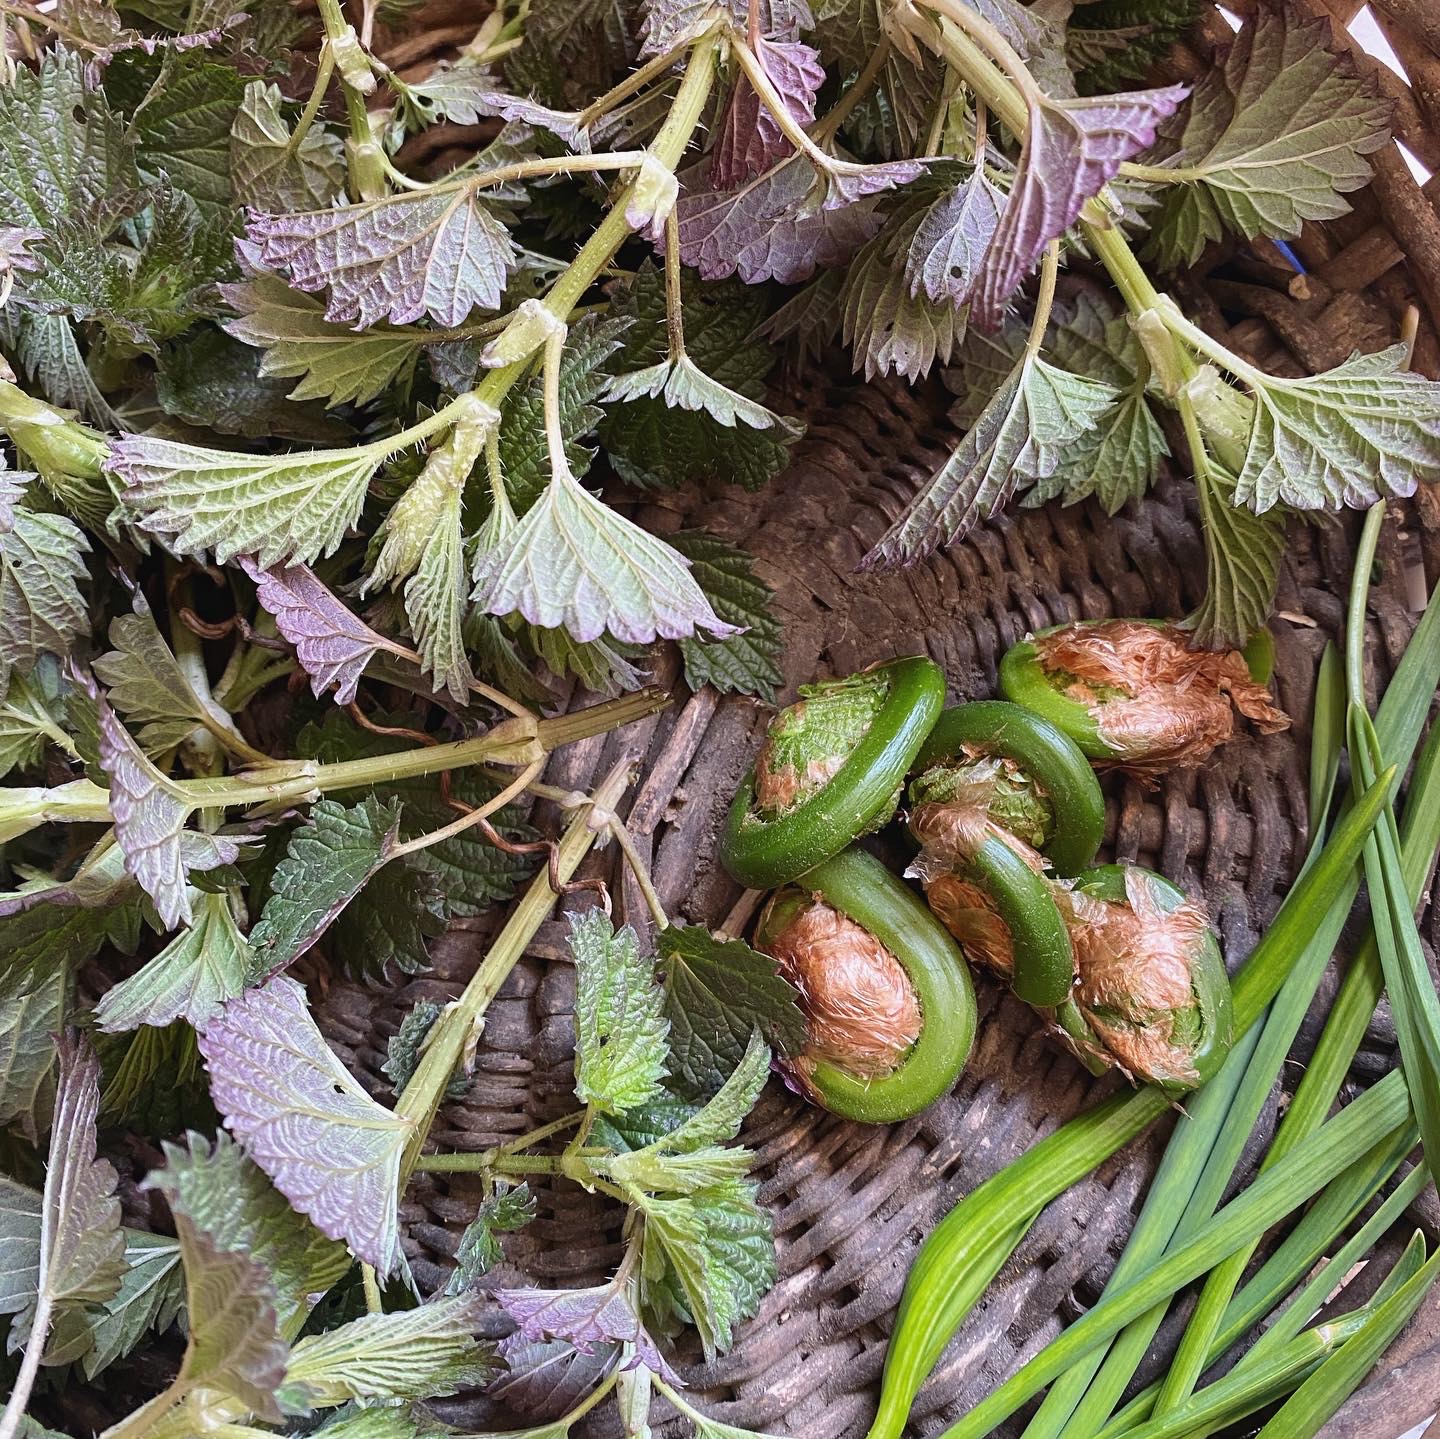 Stinging nettle, fiddleheads and onion grass in a basket